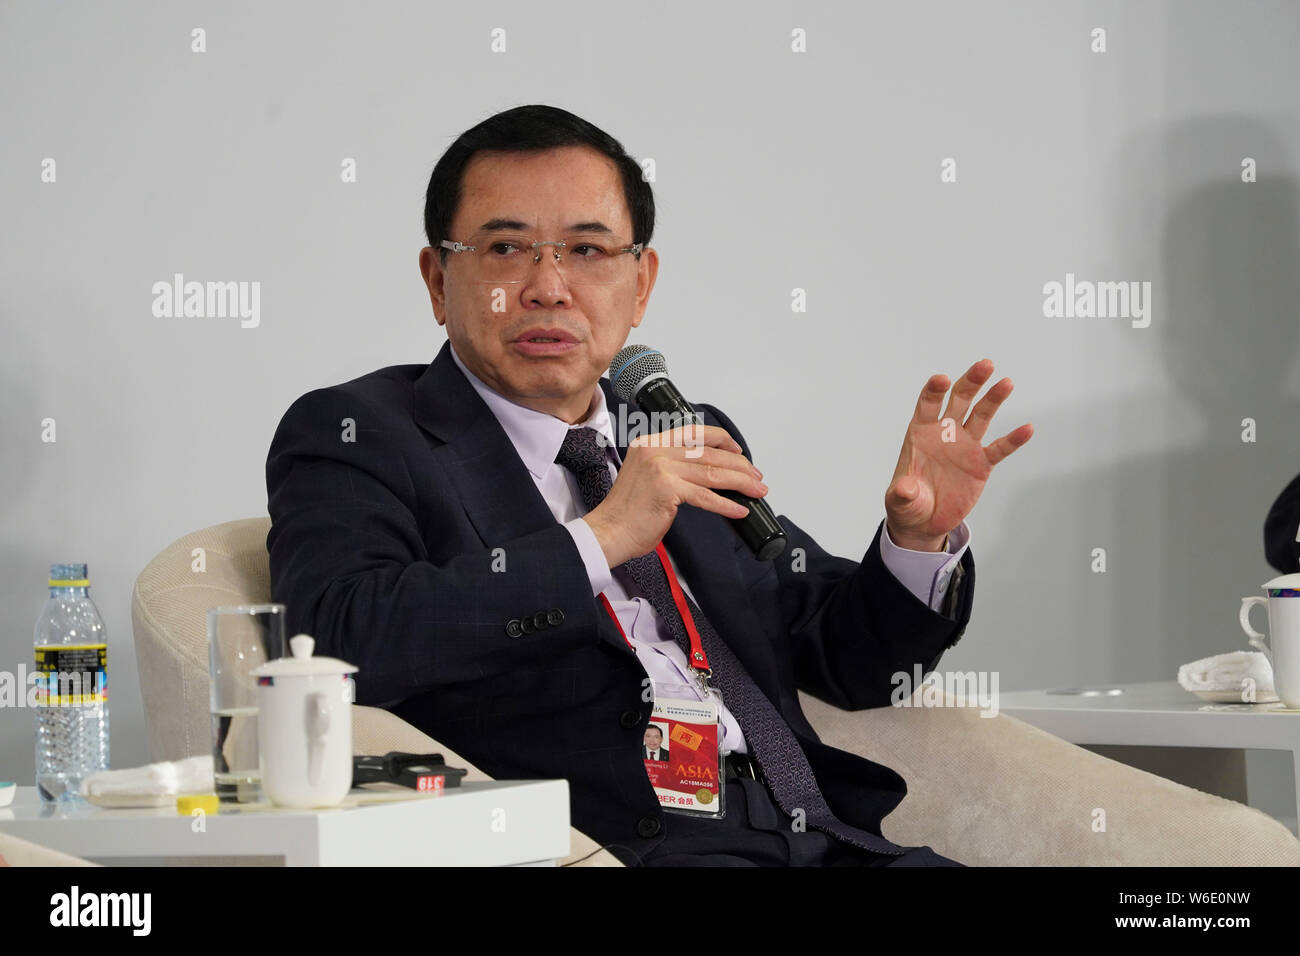 Tomson Li Dongsheng, Chairman & CEO of TCL Corporation, attends the sub-forum of 'The New Reform Agenda: Government vs the Market' during the Boao For Stock Photo